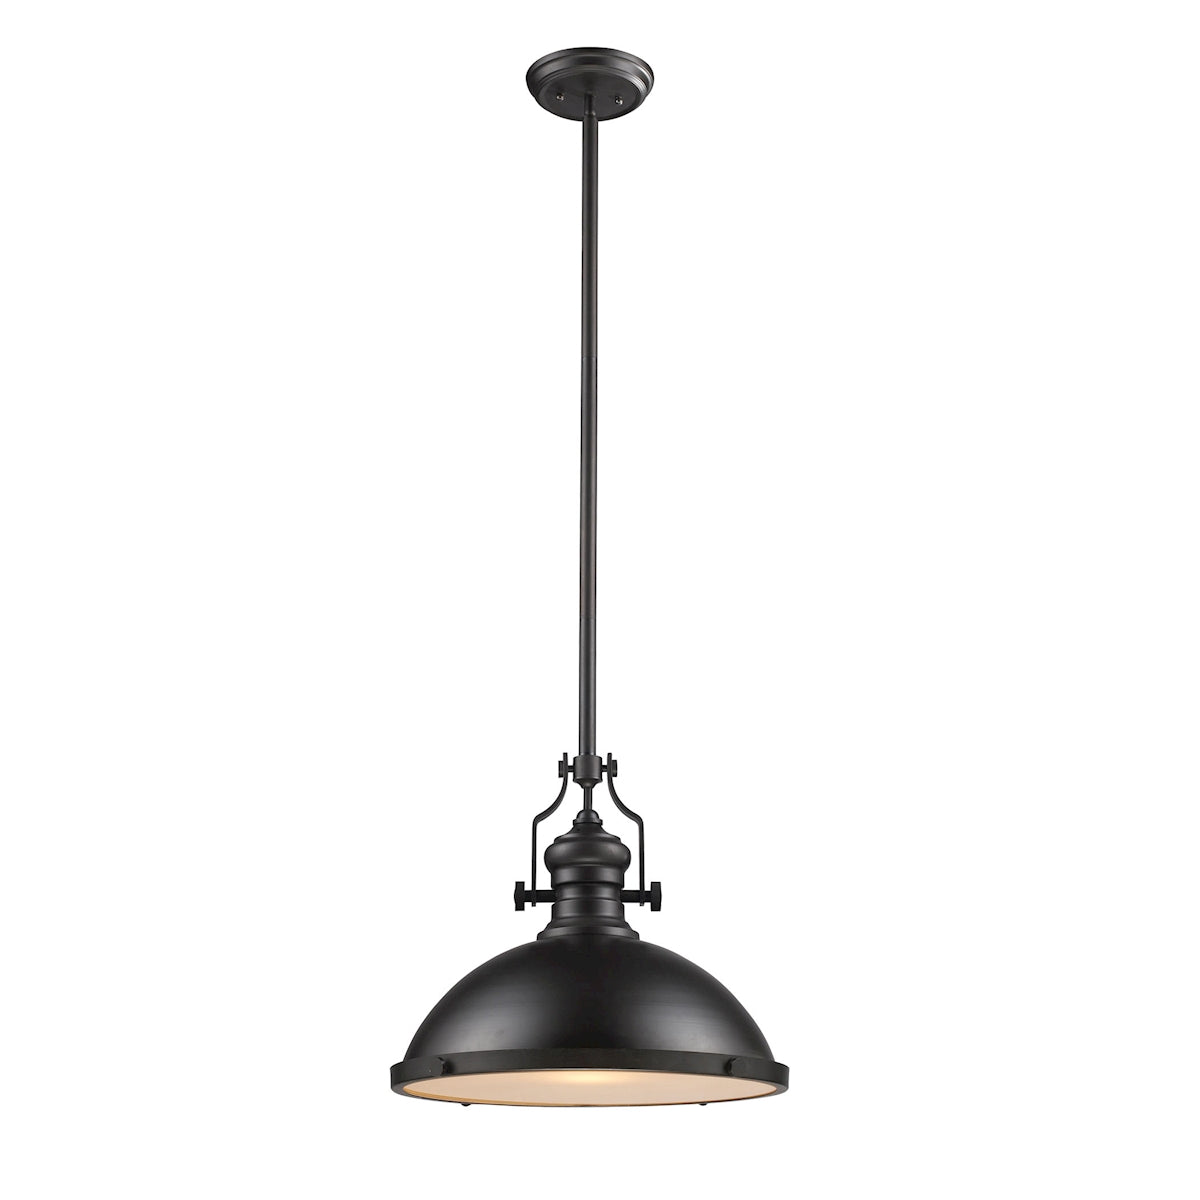 ELK Lighting 66138-1 Chadwick 1-Light Pendant in Oiled Bronze with Matching Shade